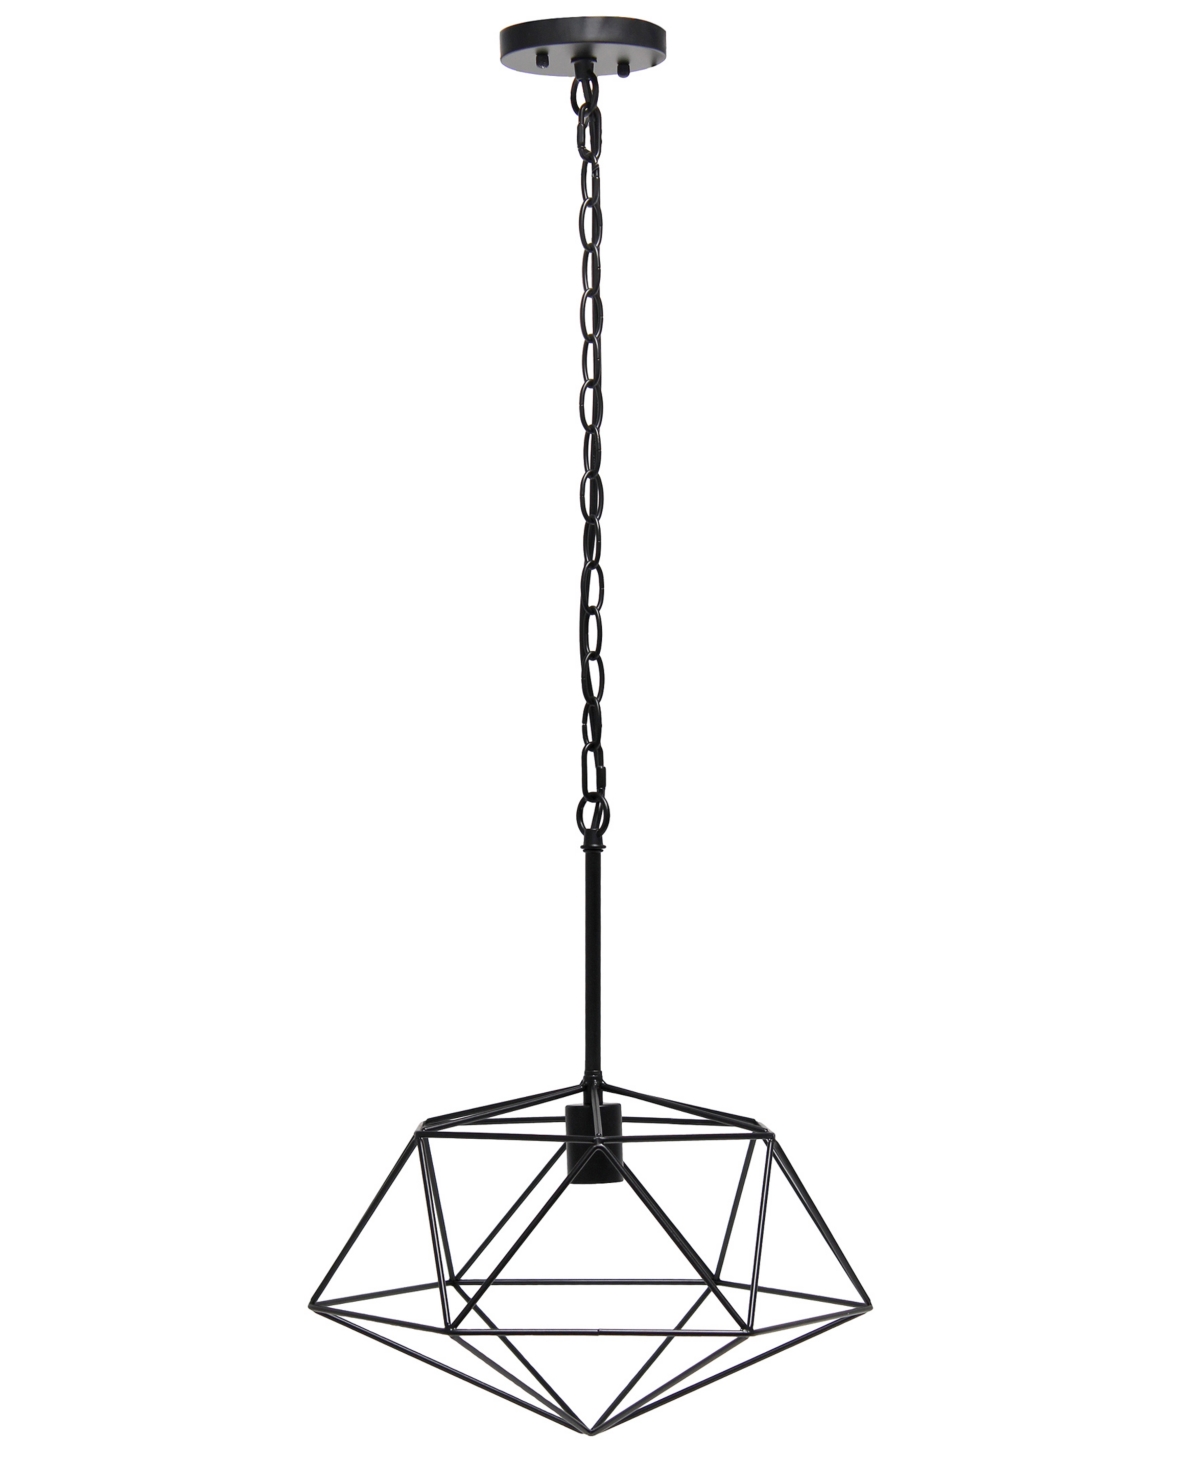 All The Rages 1 Light 16" Modern Metal Wire Paragon Hanging Ceiling Pendant Fixture In Black